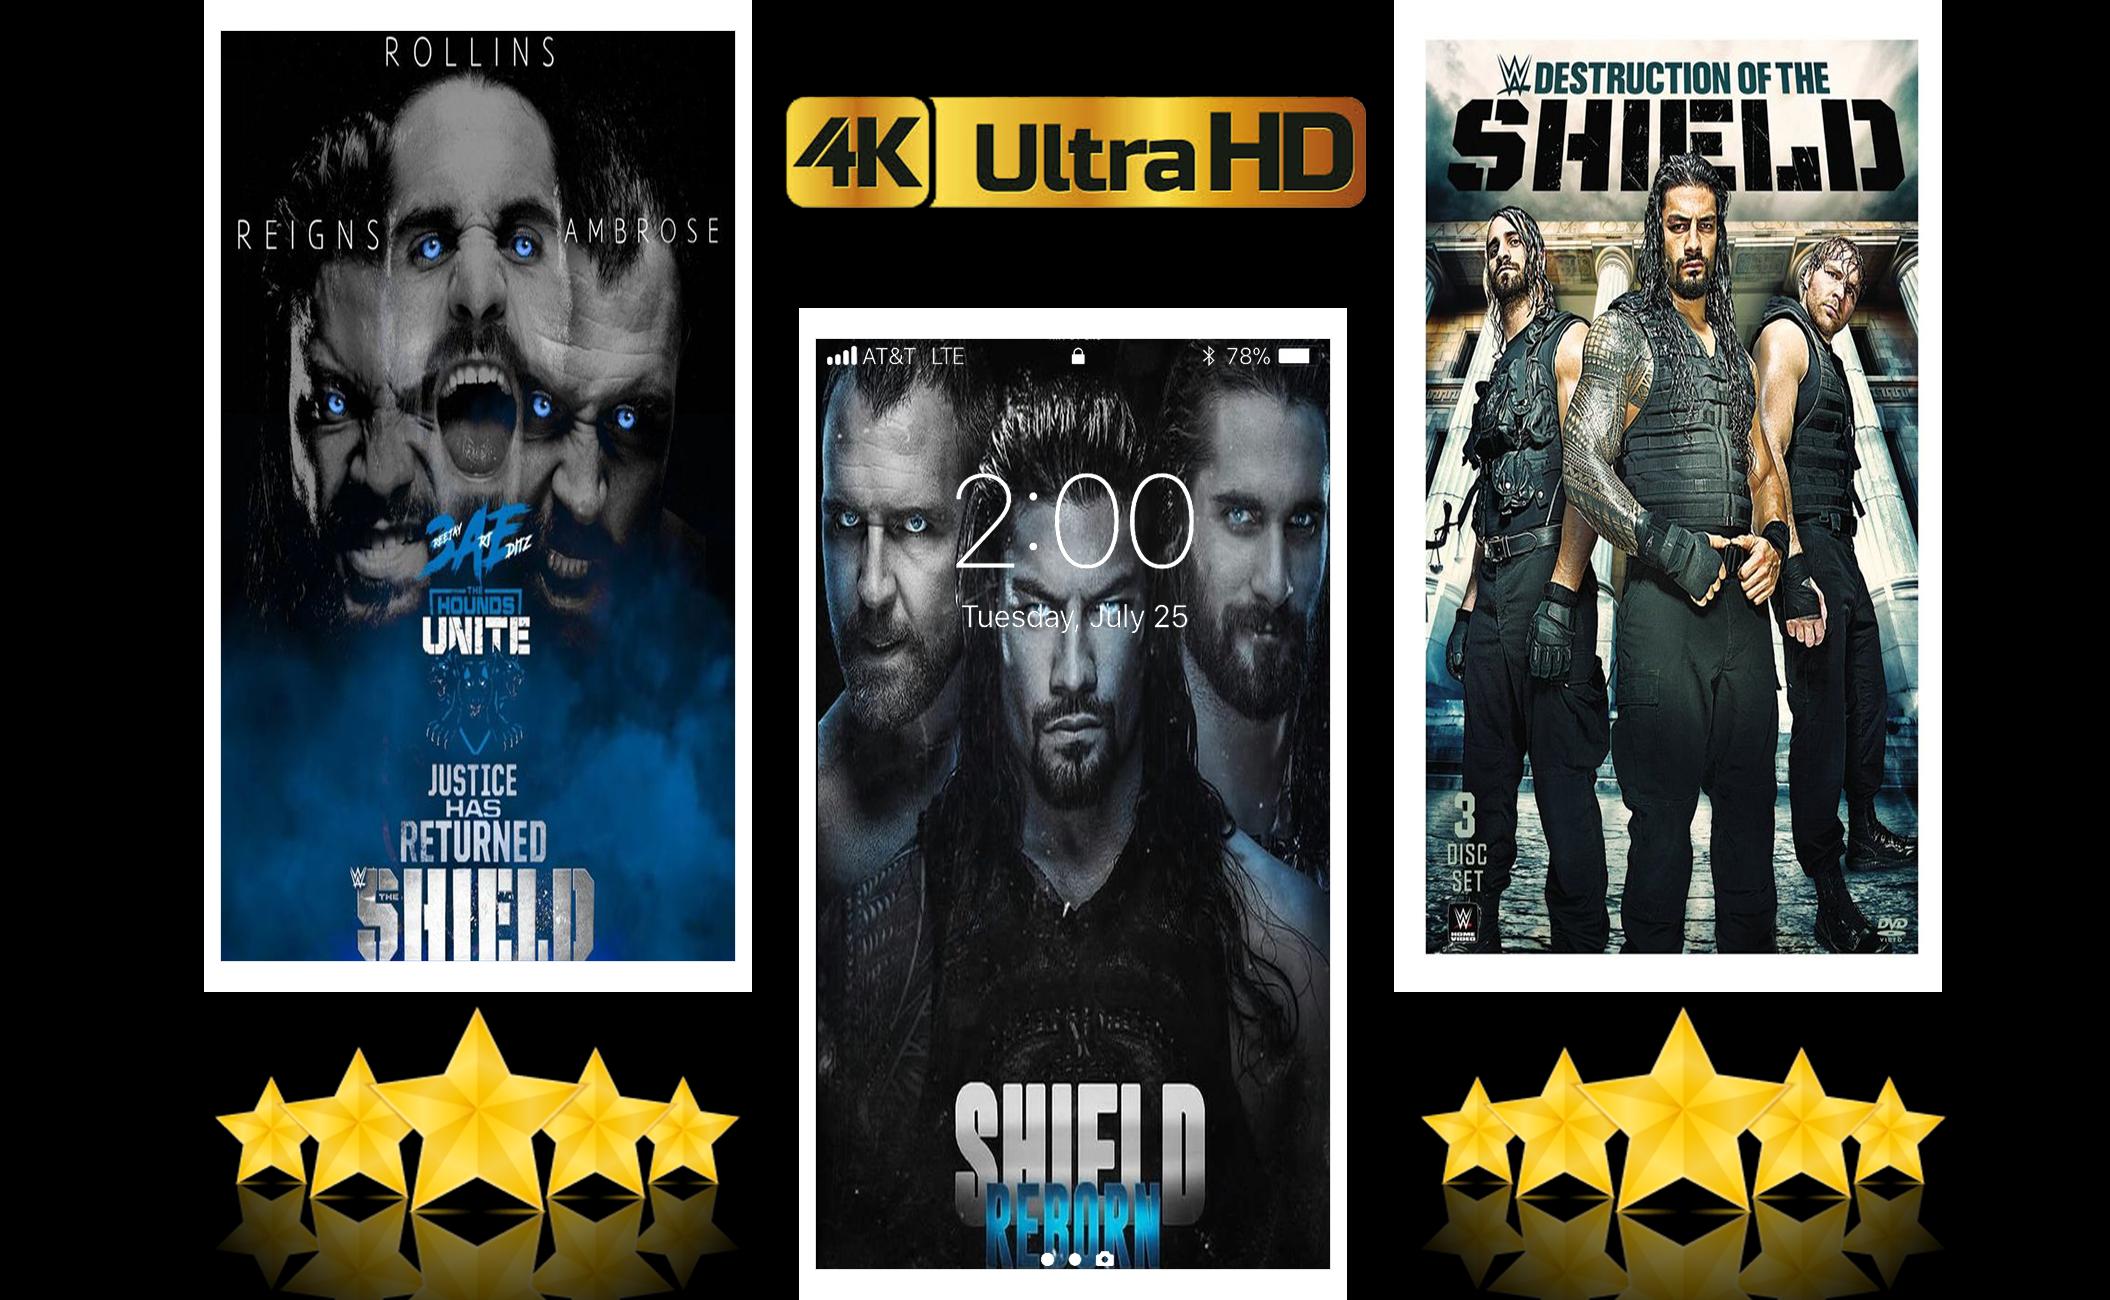 The Shield Ww E Wallpaper 2019 4k Hd Top Shield For Android Apk